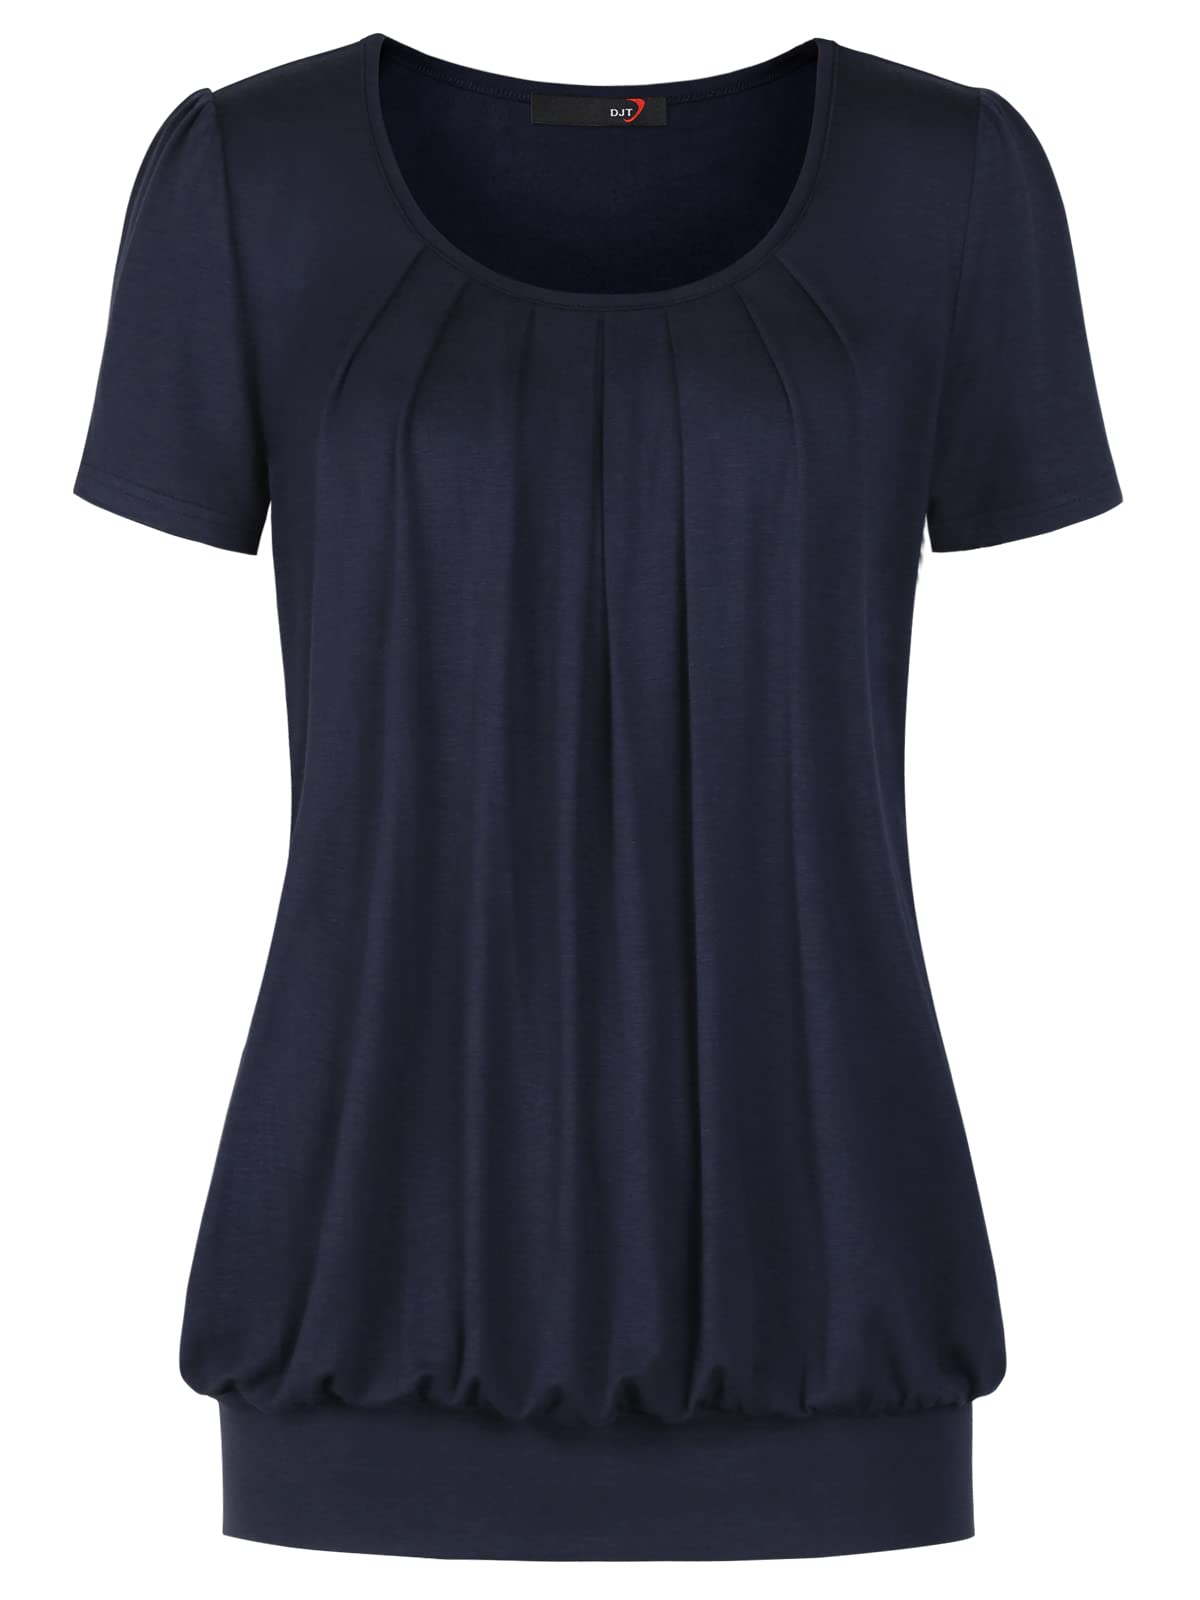 DJT Scoop Neck Navy Sleeve Women's Pleated Front Blouse Tunic Tops